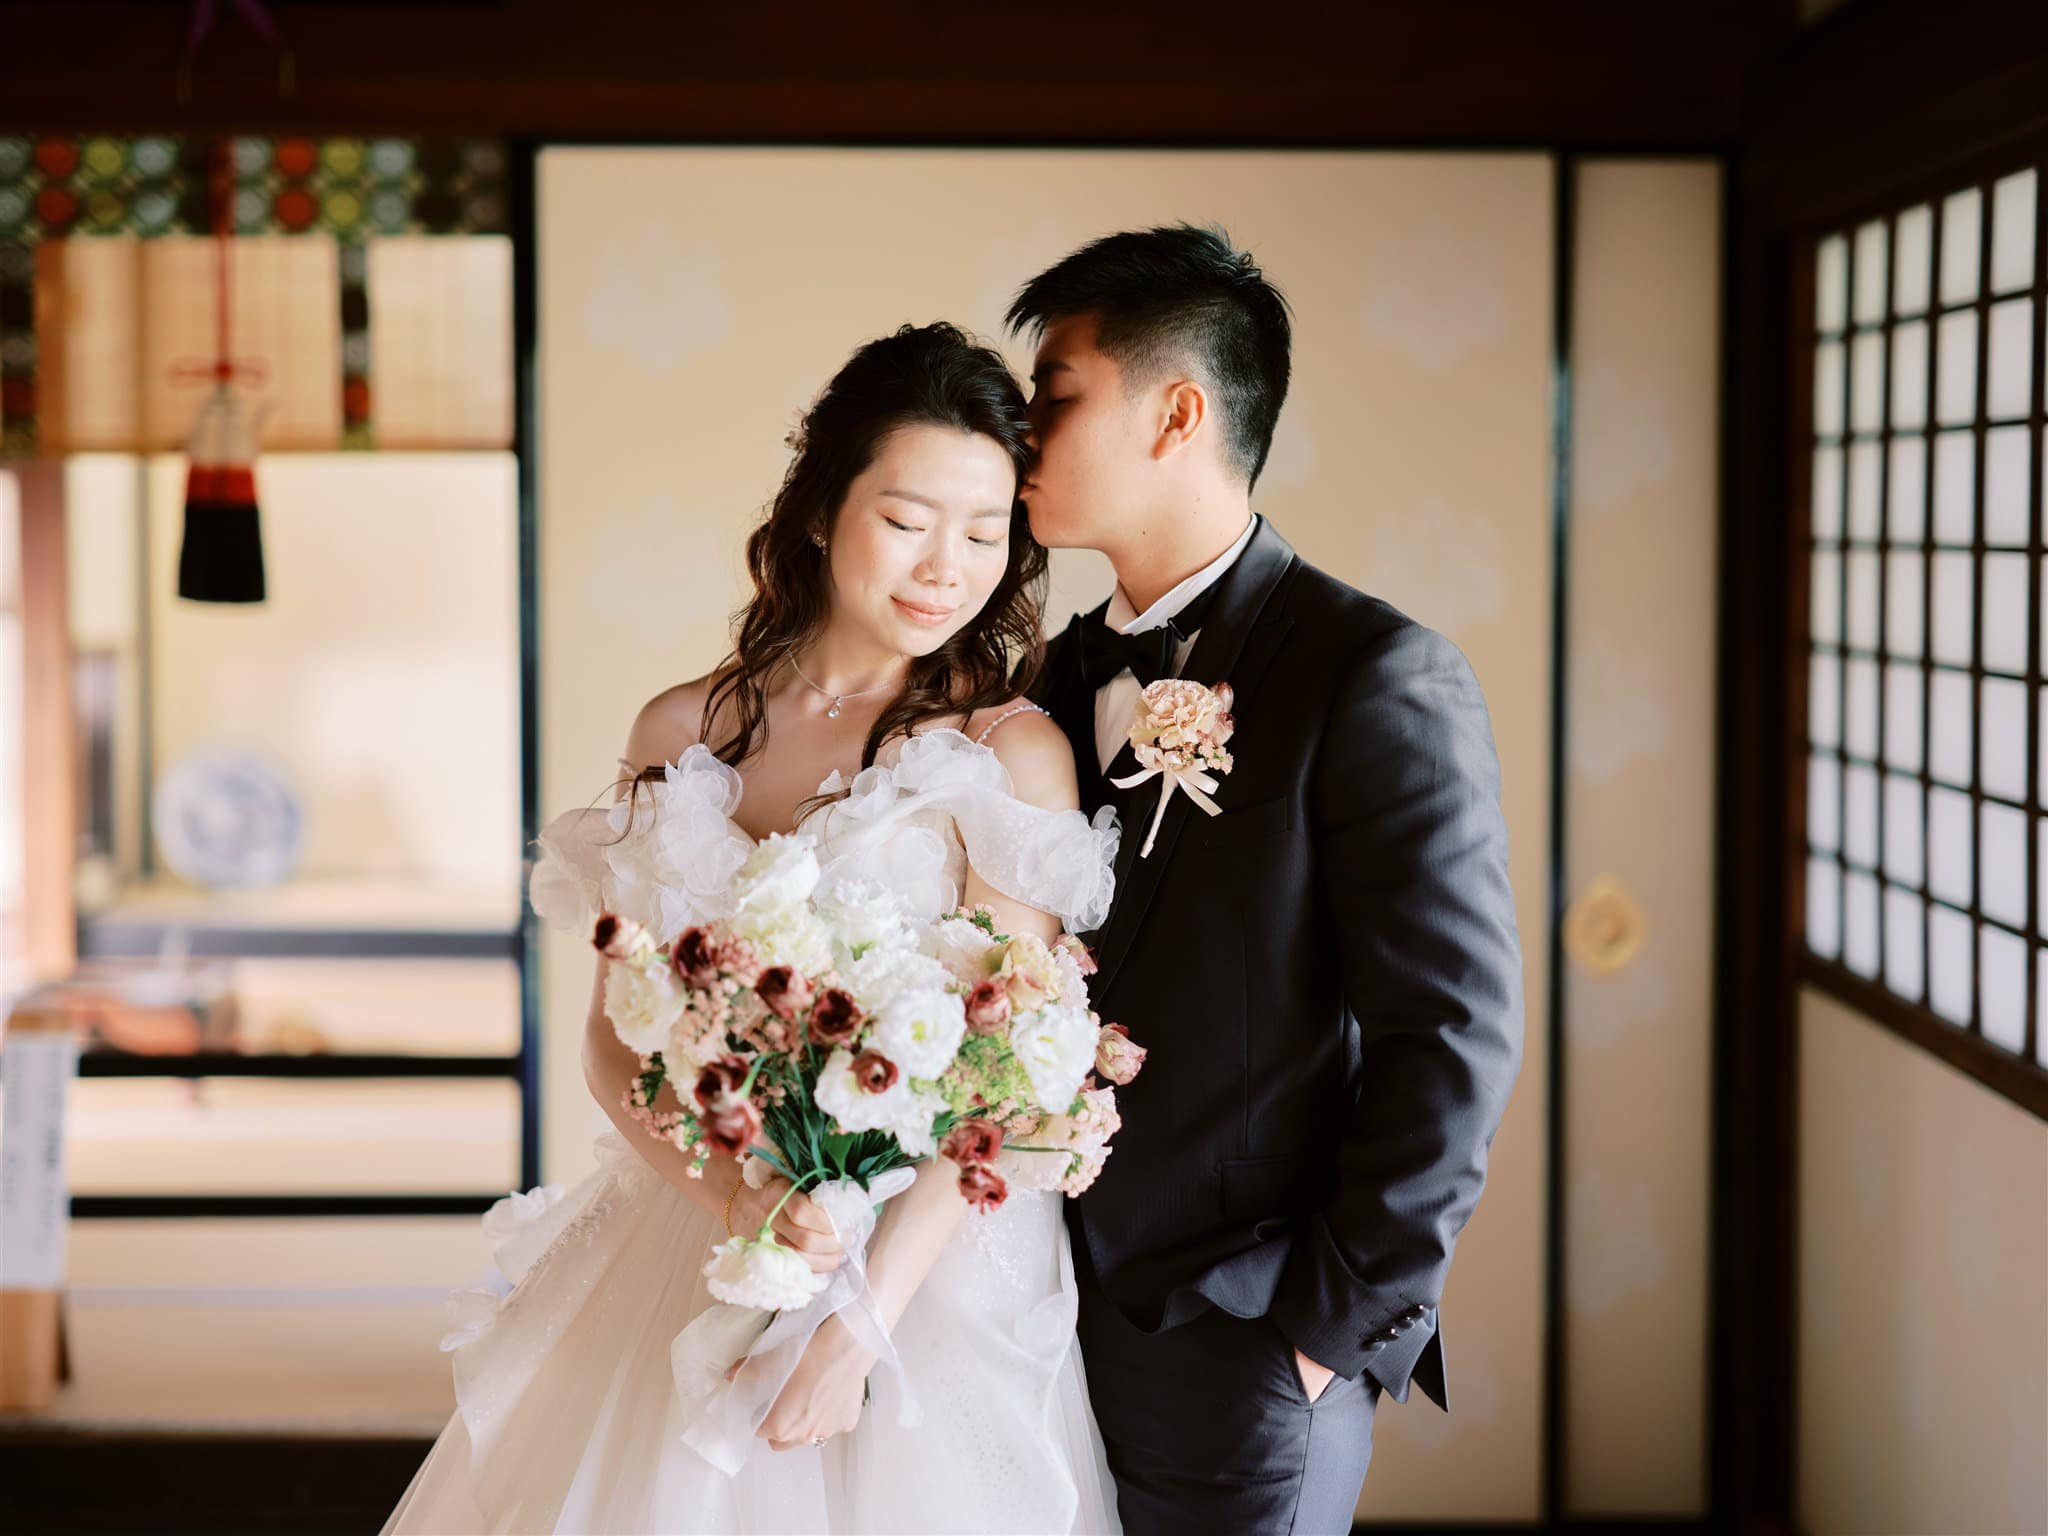 Kyoto Tokyo Japan Elopement Wedding Photographer, Planner & Videographer | A bride and groom elegantly posing in a traditional Japanese room captured by a talented Japan elopement photographer.